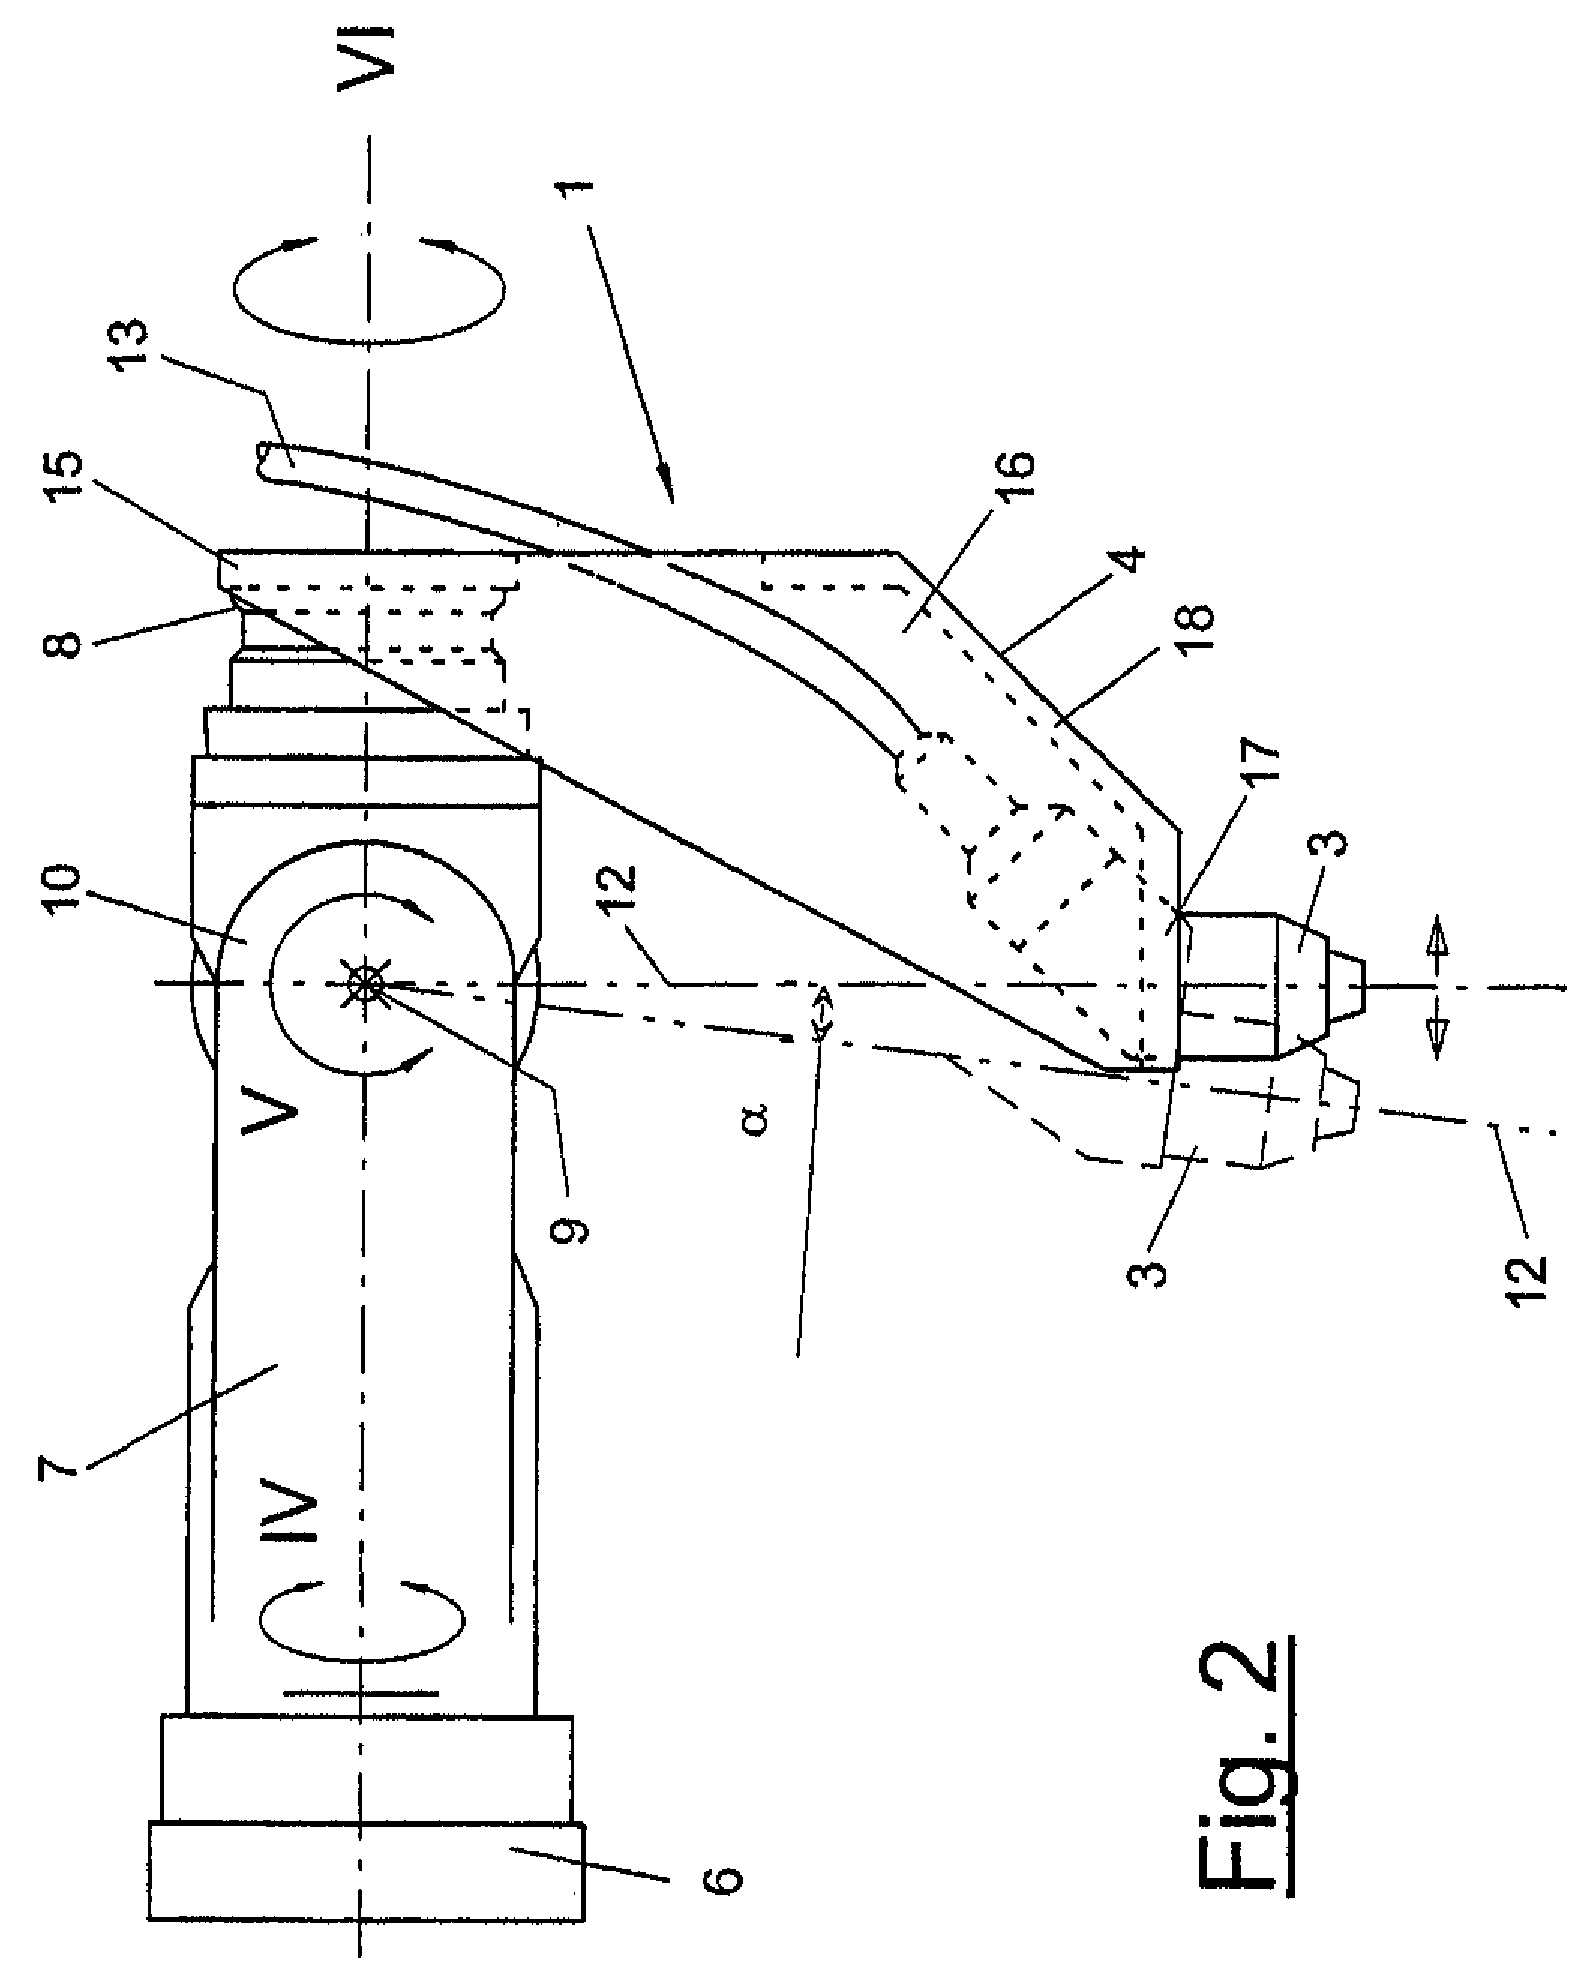 Process for the laser beam machining, especially laser beam welding, of components